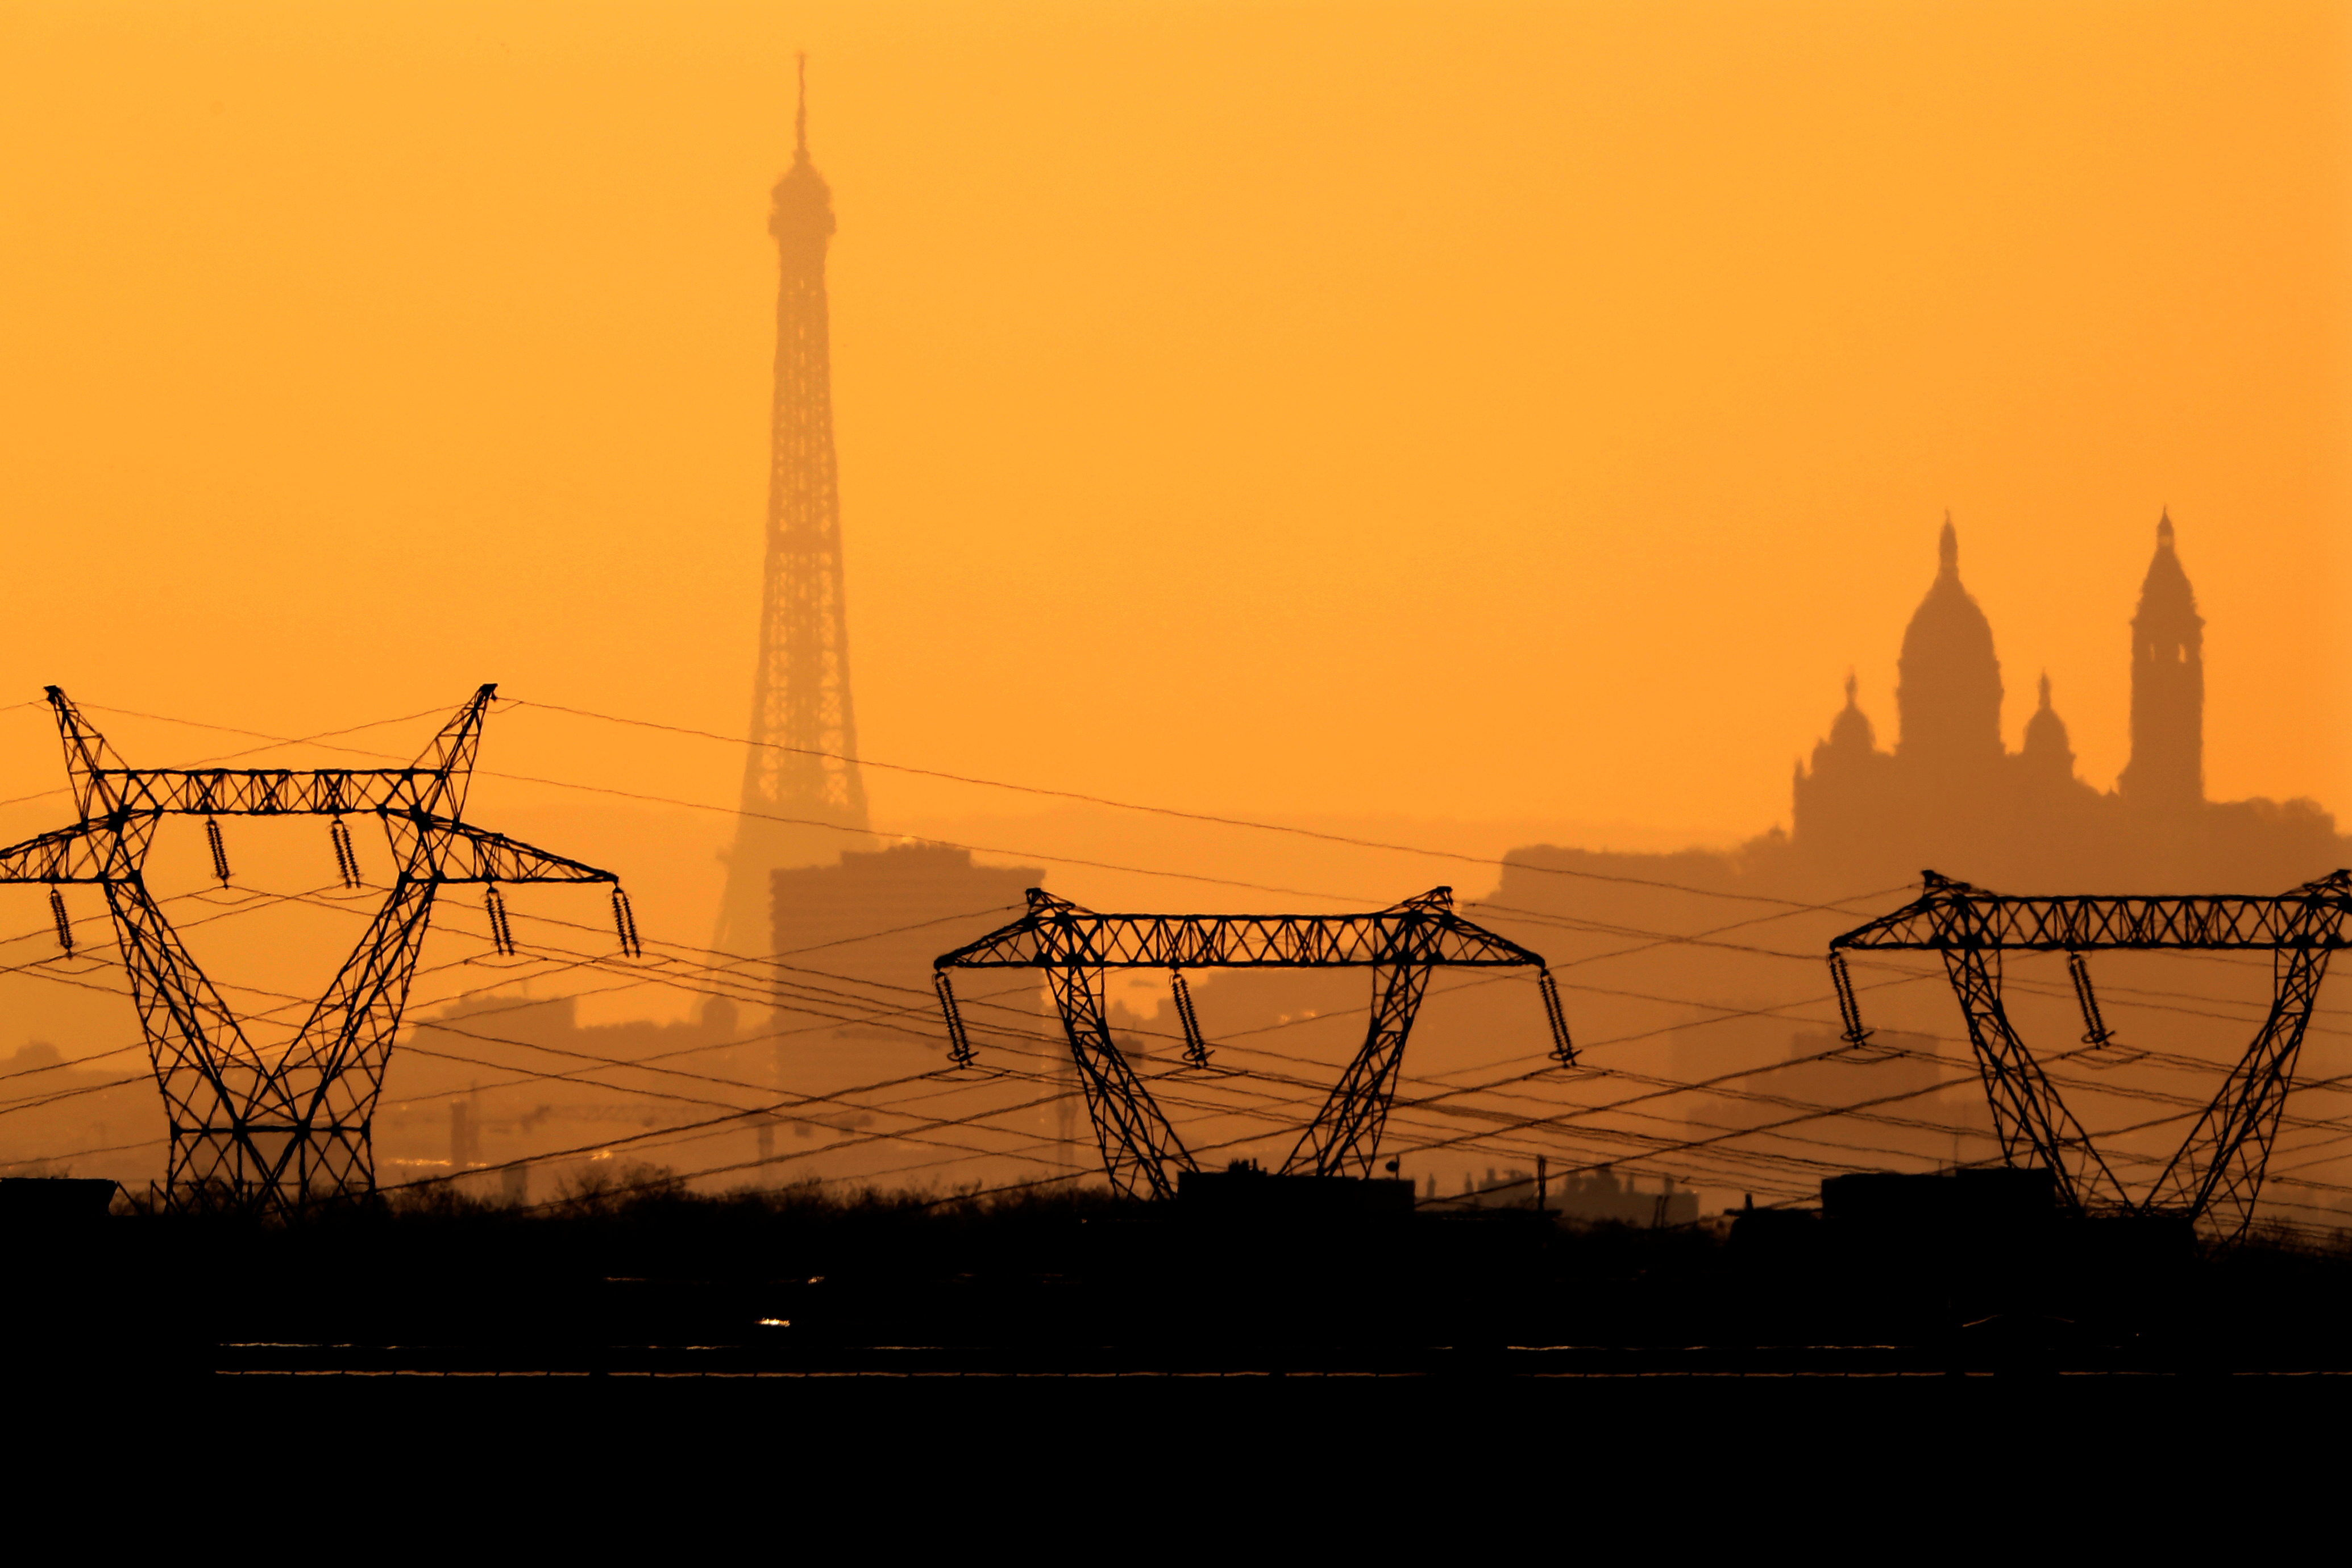 Electricity pylons of high-tension electricity power lines are seen in front of the Eiffel Tower (L) and the Sacre Coeur Basilica on Montmartre from Roissy at sunset